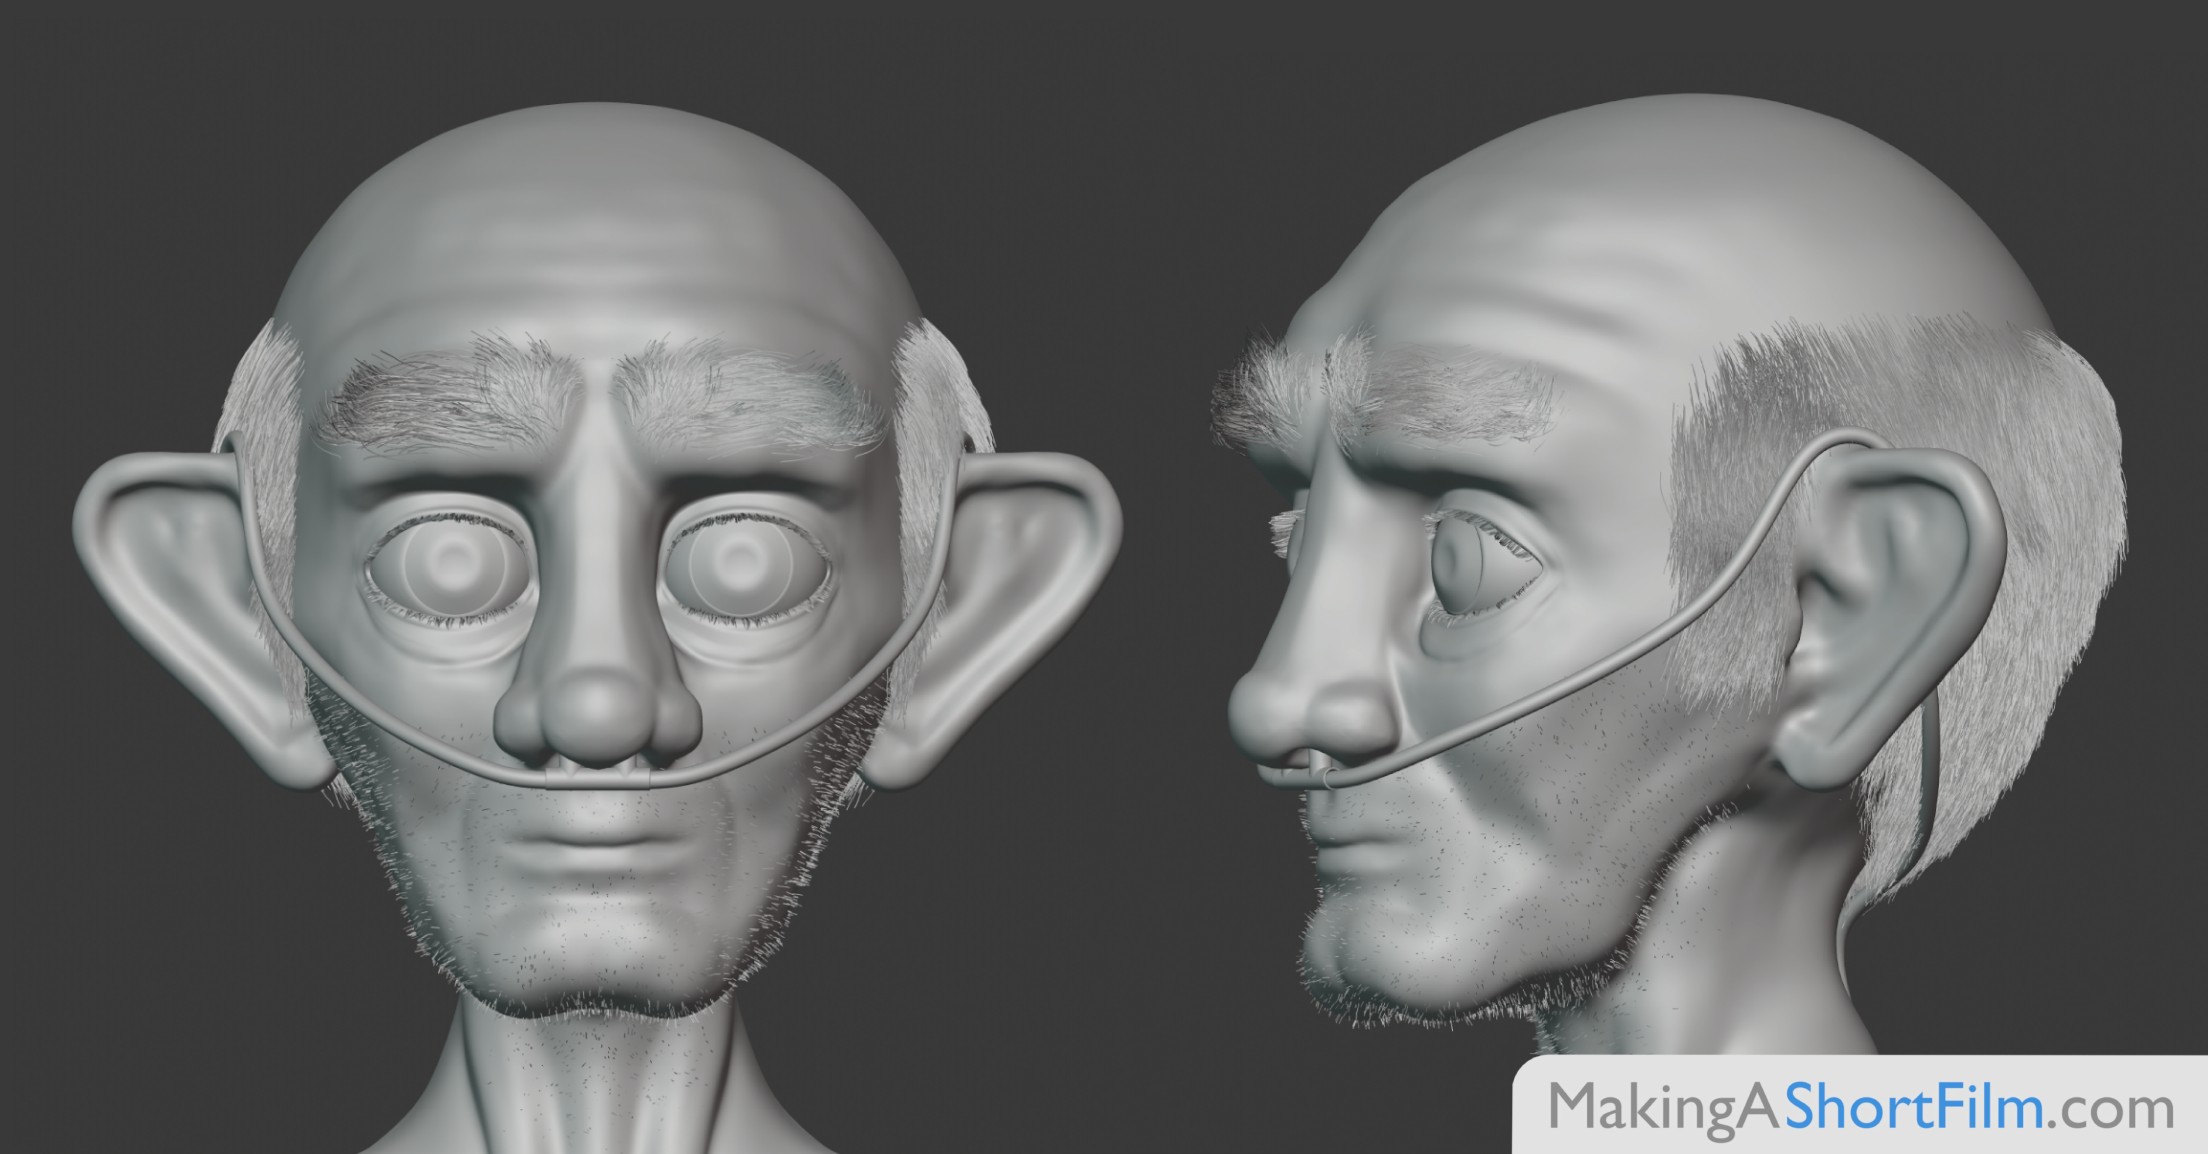 Finish Modelling the Old Man